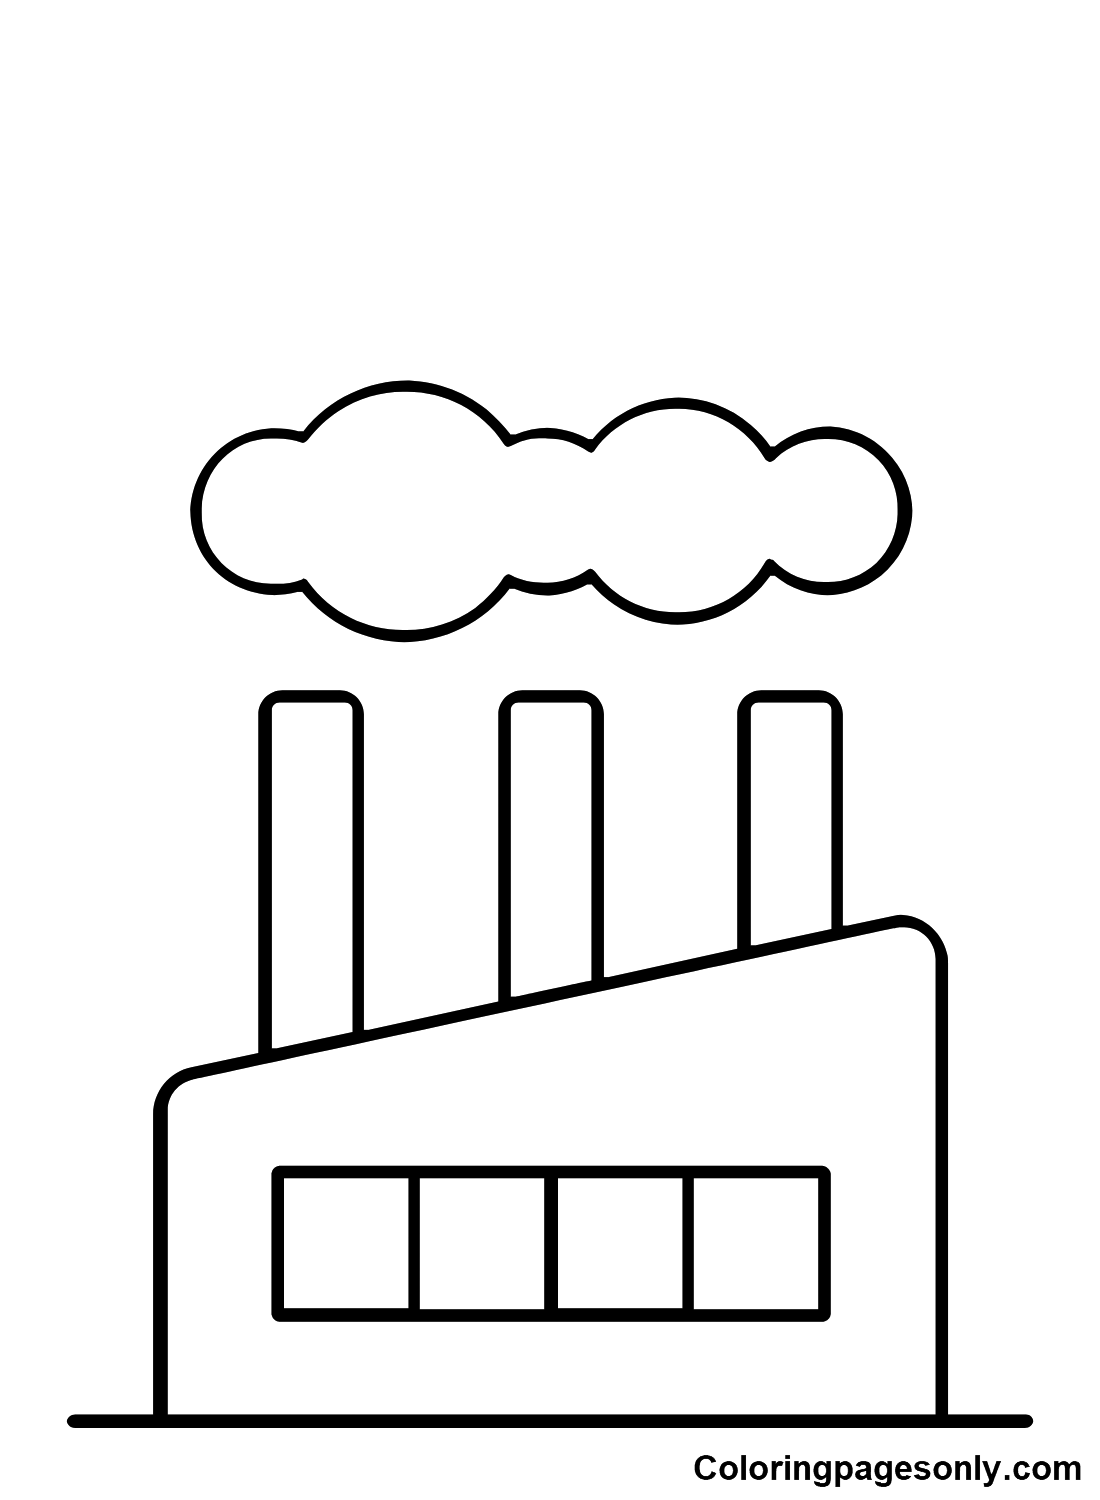 Factory Sheets Coloring Pages